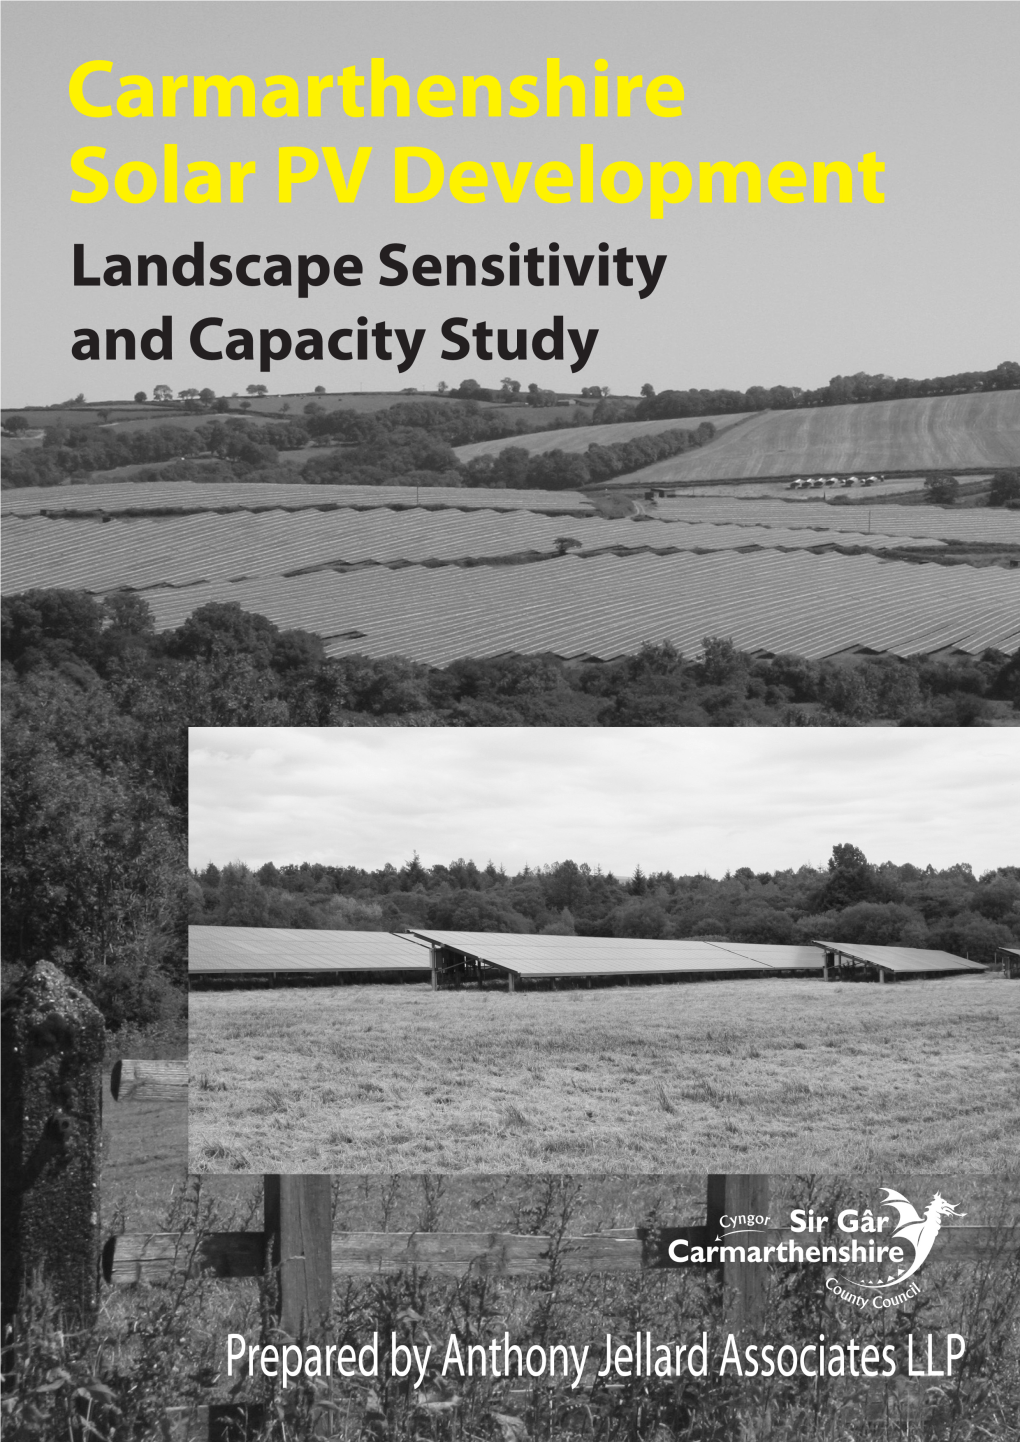 Solar PV Development Through Setting out a Baseline Assessment of Landscape and Visual Sensitivity and Capacity in Relation to Different Development Classifications